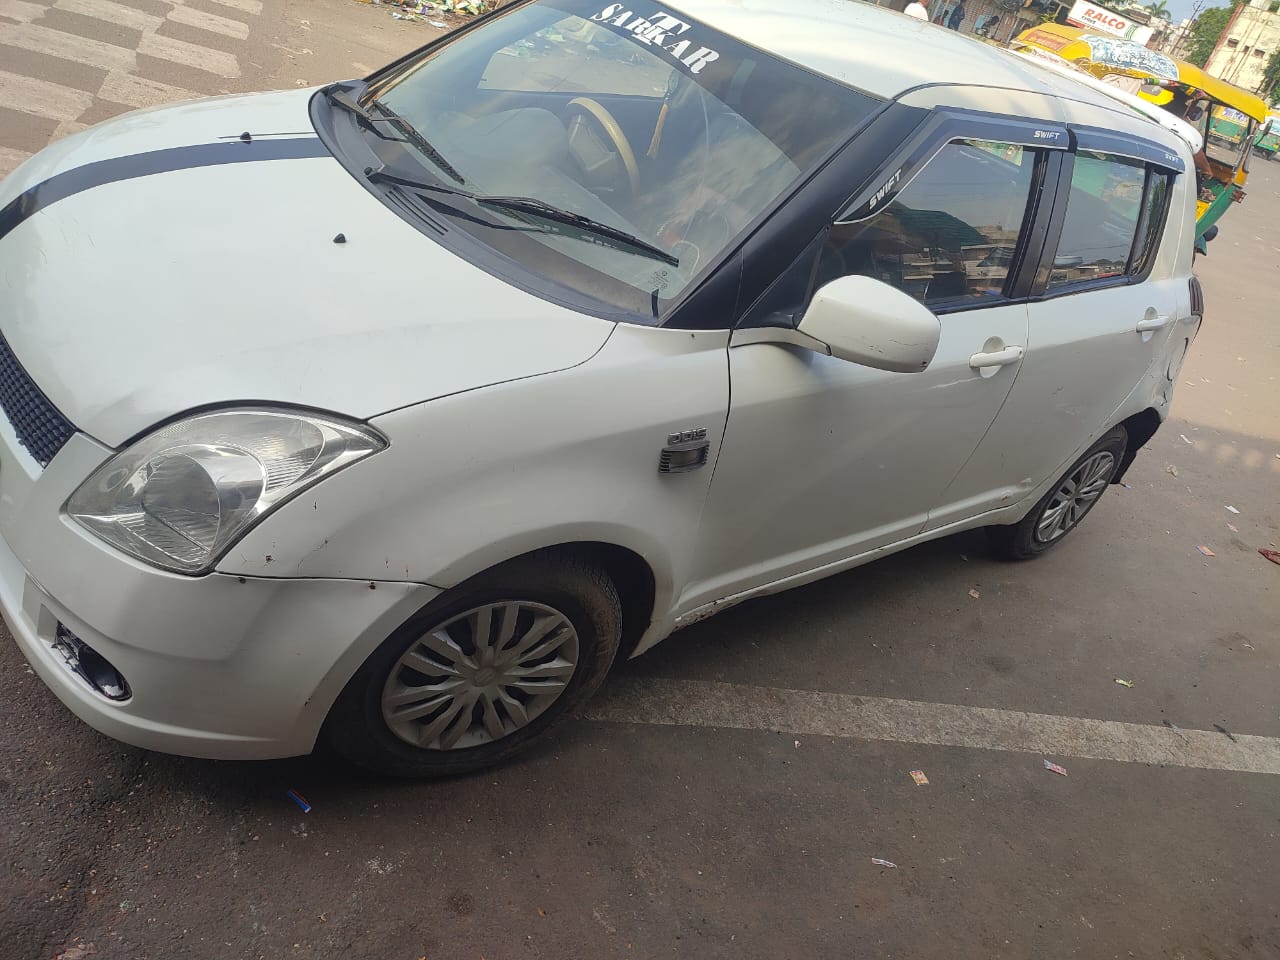 Details View - swift car photos - reseller,reseller marketplace,advetising your products,reseller bazzar,resellerbazzar.in,india's classified site,Diseal swift car | swift car in gujarat | old swift car